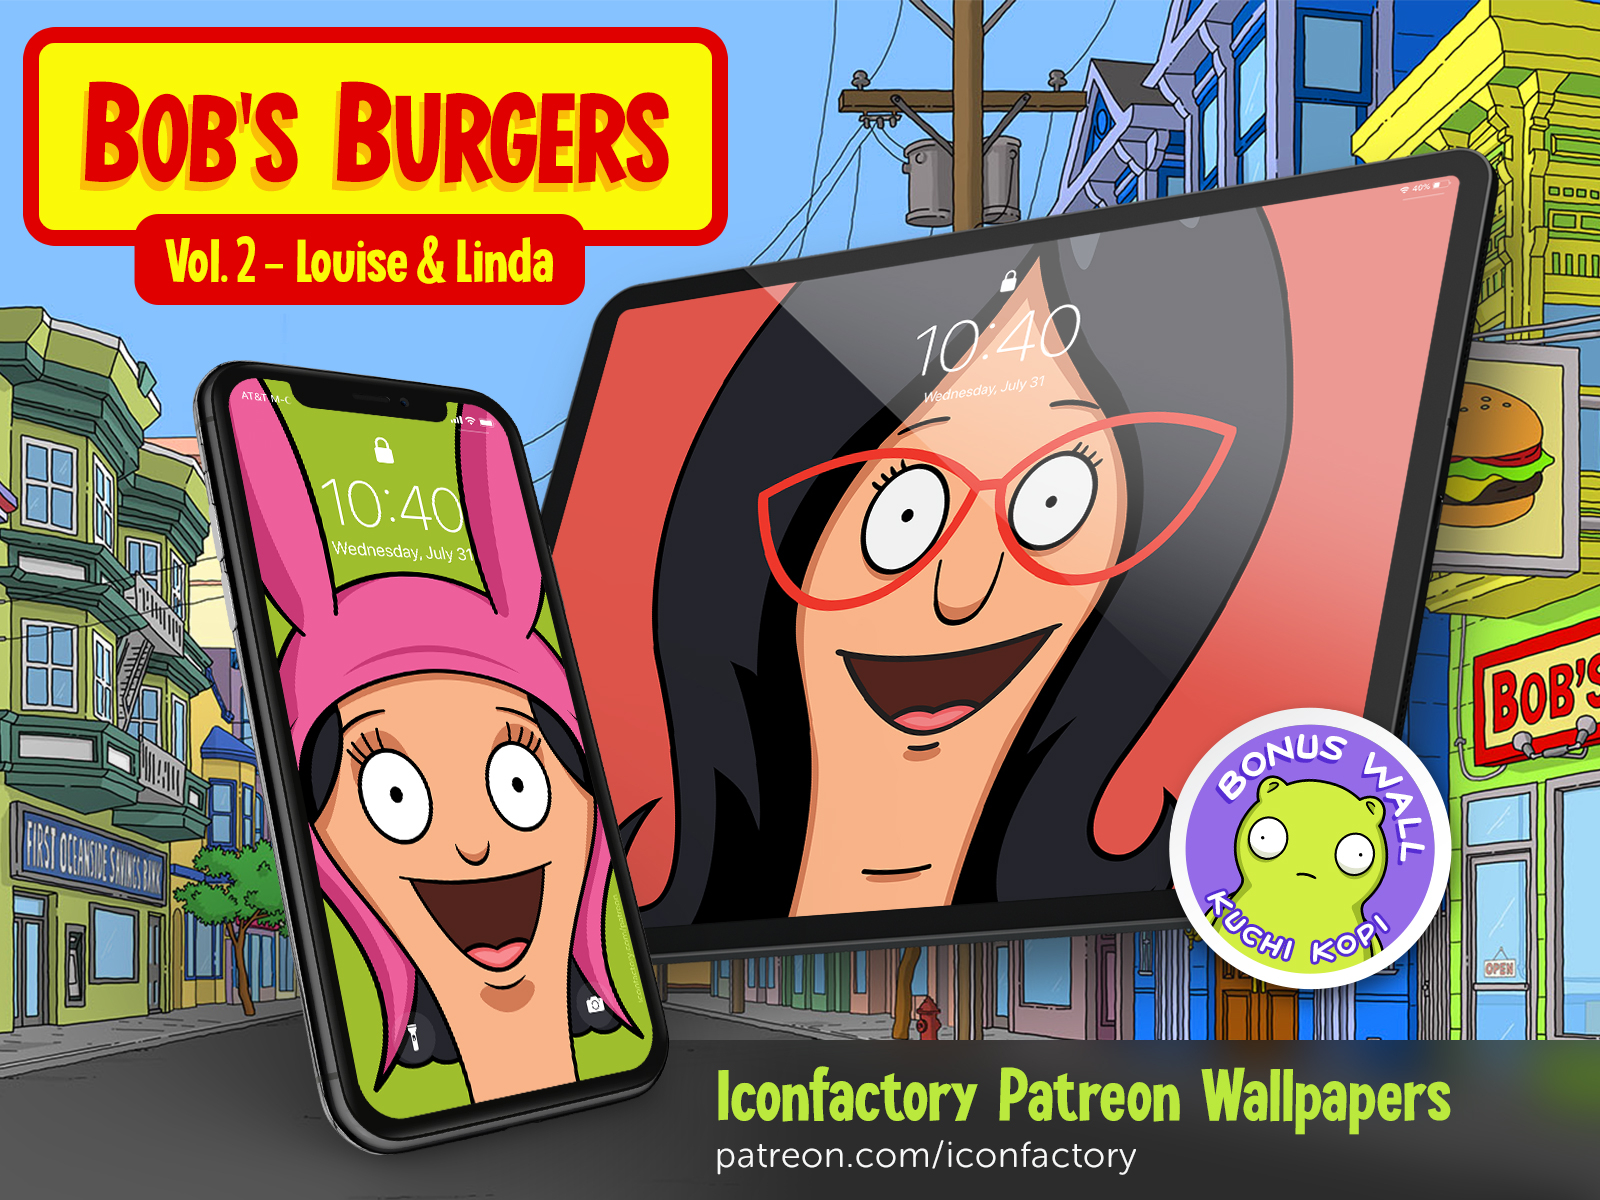 Bobs Burgers Vol 2 Wallpapers by Iconfactory on Dribbble